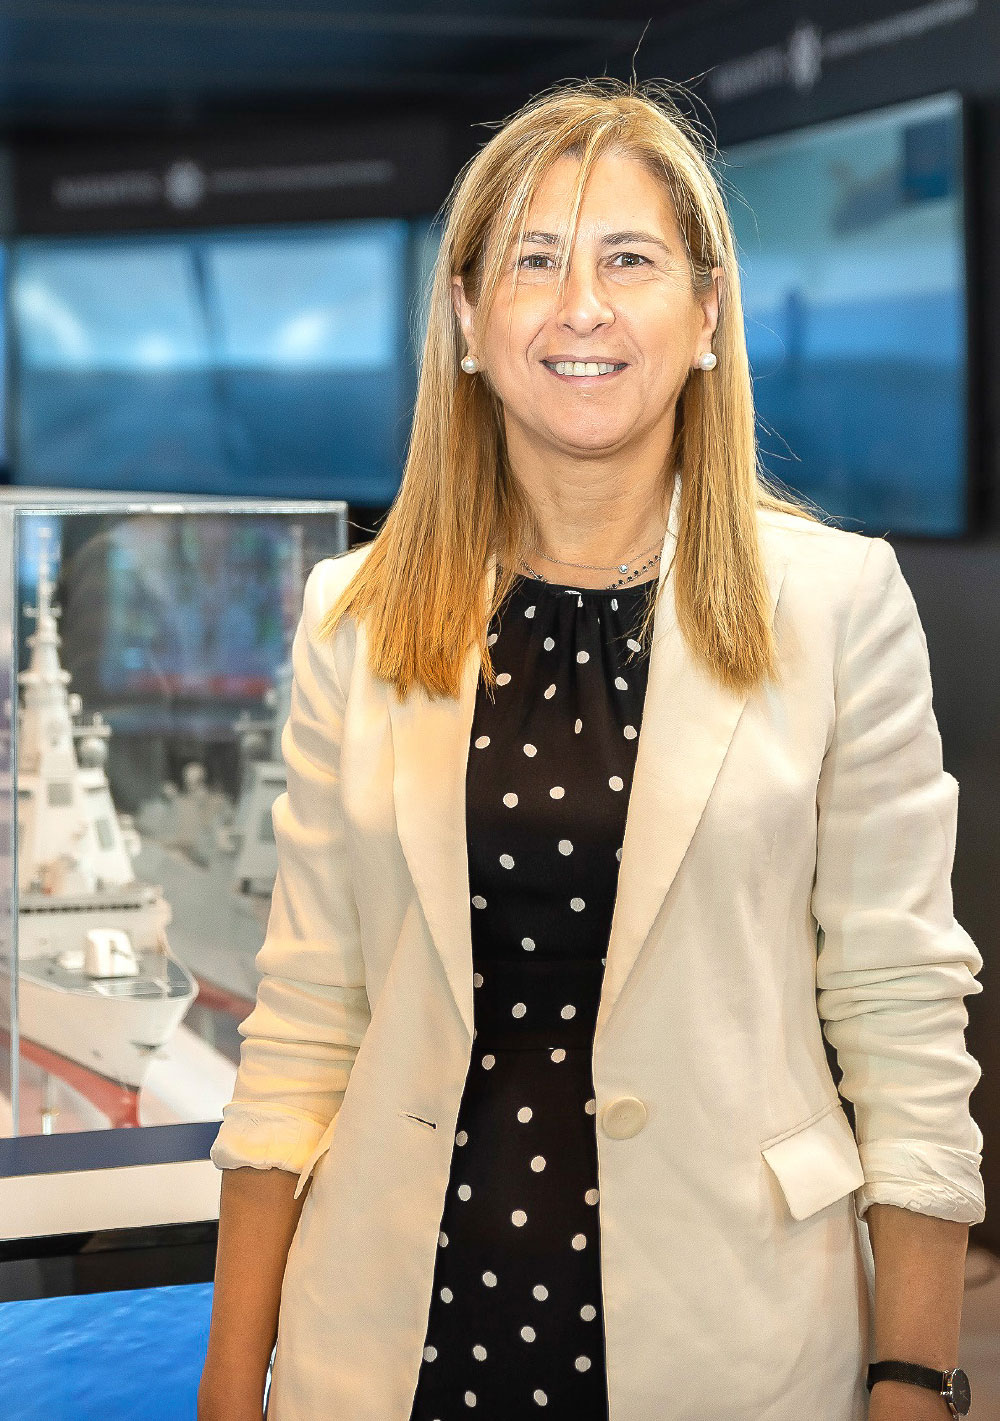 Navantia - Ambitious Projects Where Experience Matters   